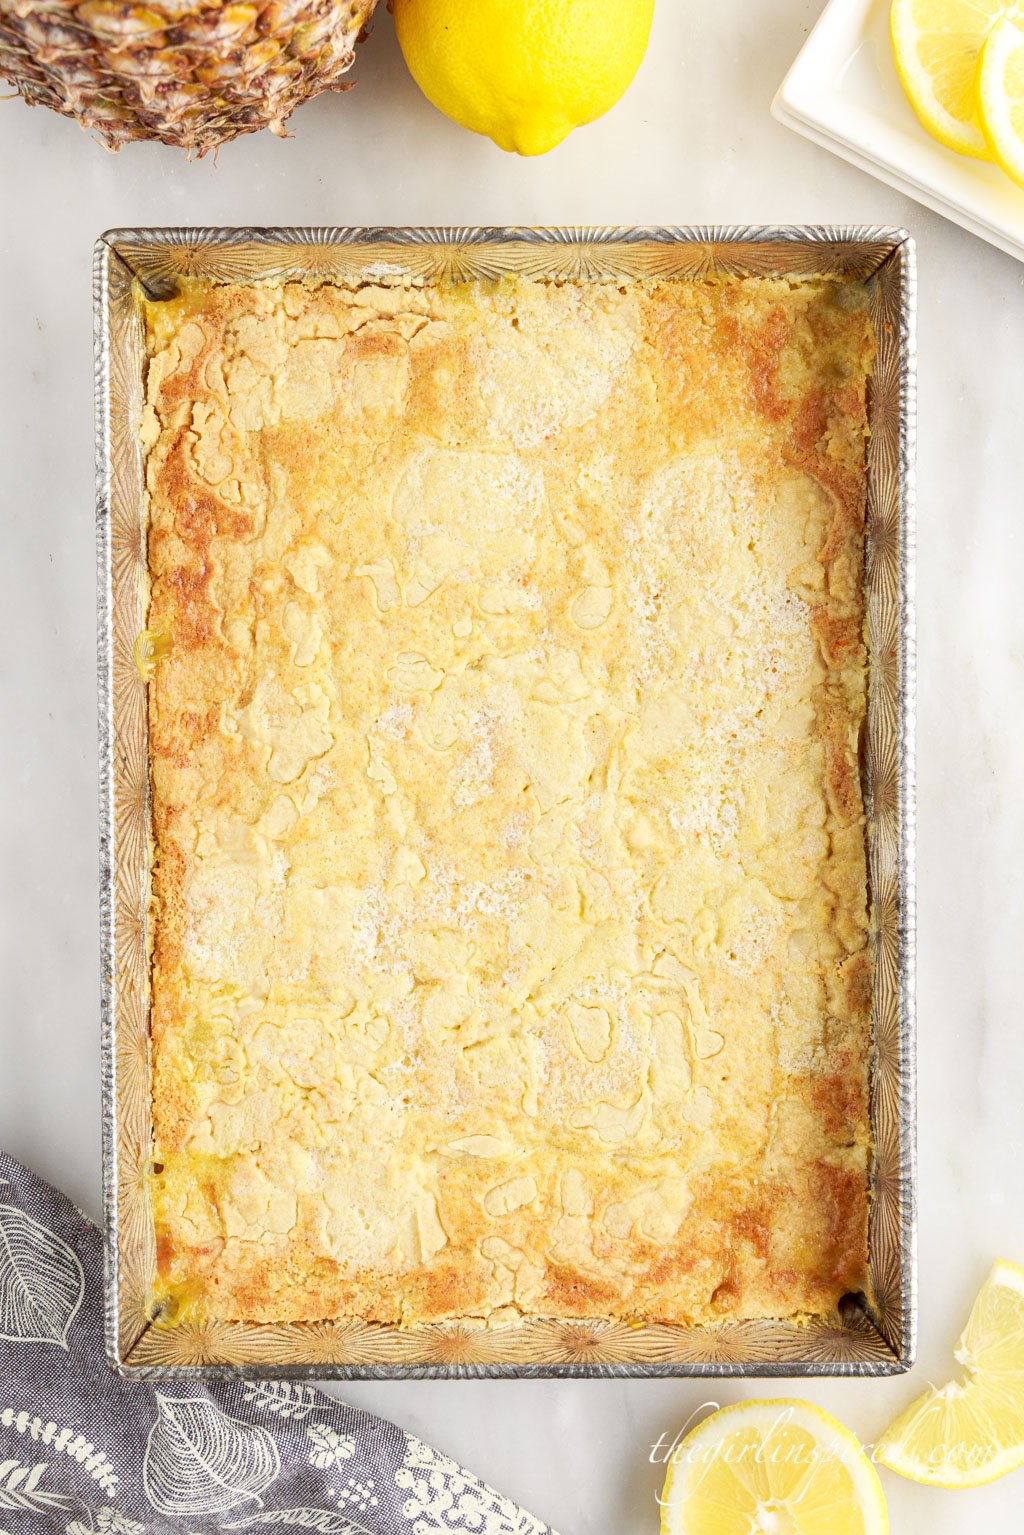 Top view of the baked lemon pineapple dump cake in a silver baking pan.